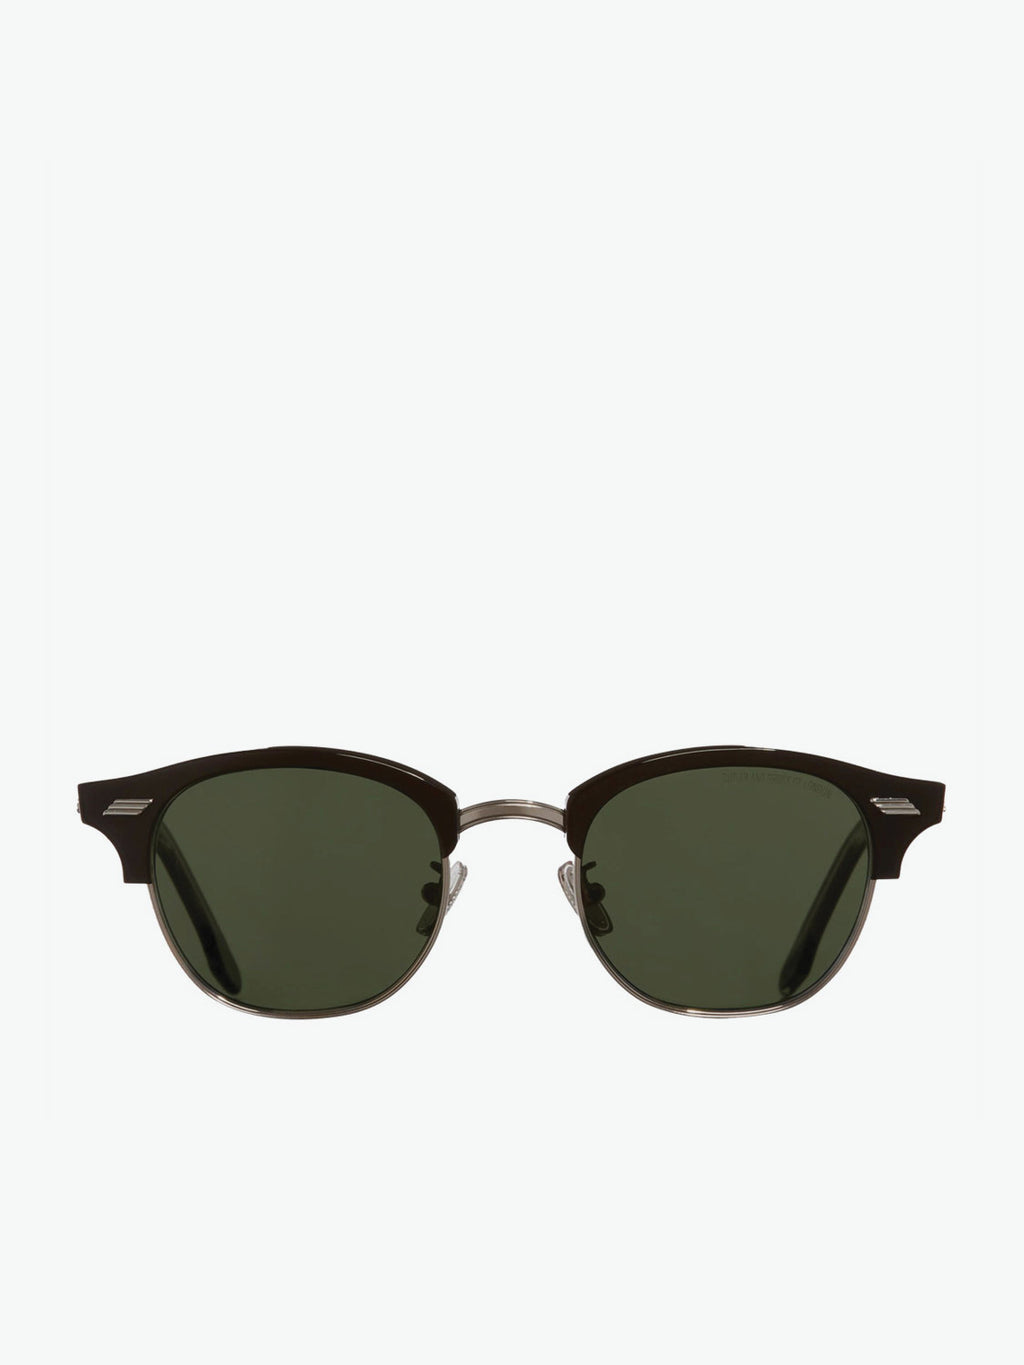 Cutler and Gross Rounded Square Black Sunglasses | A